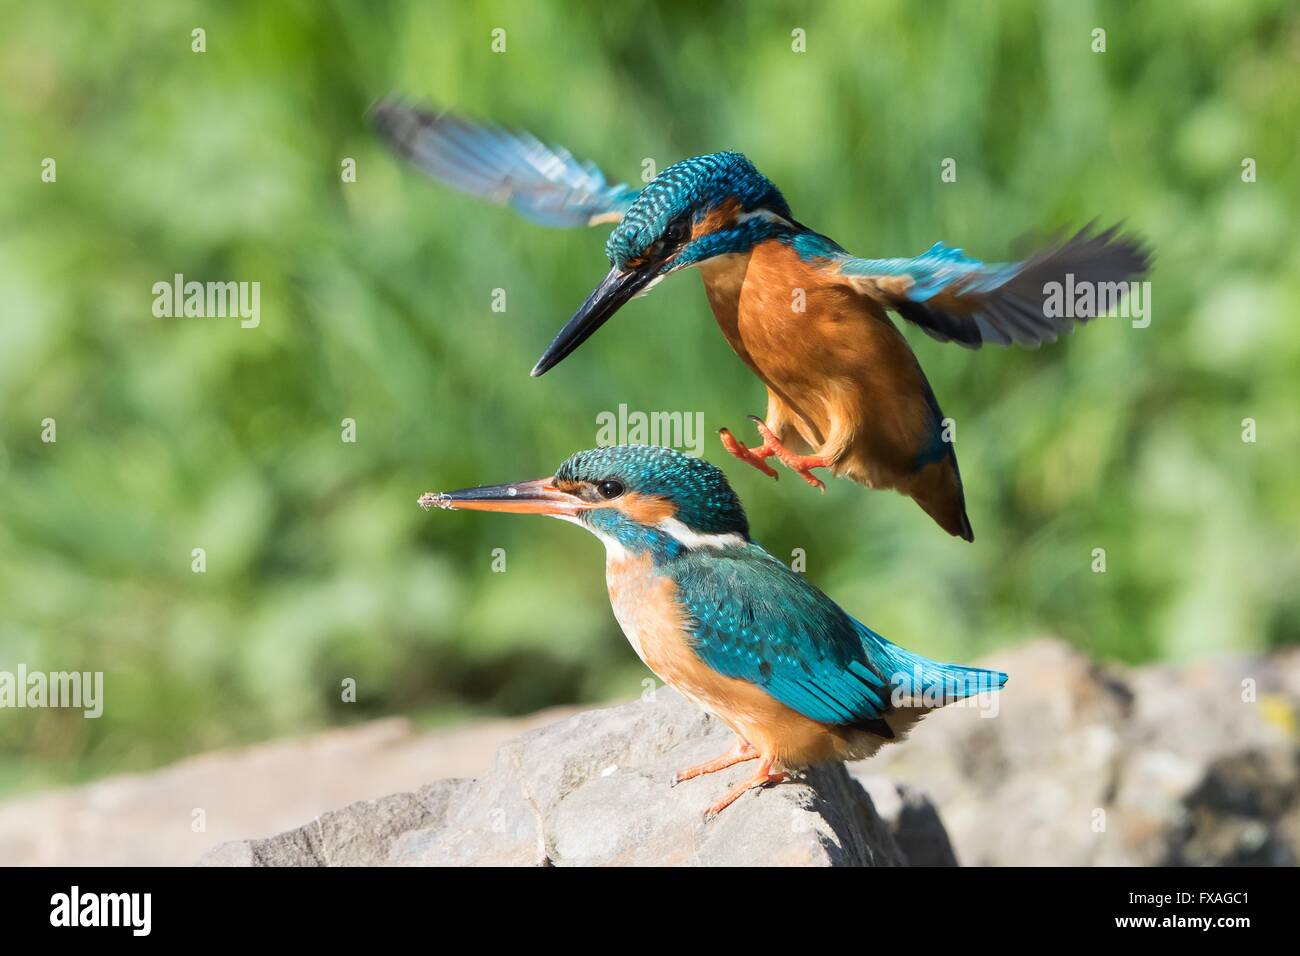 Male Kingfisher (Alcedo atthis) landing on the back of the female for mating, Hesse, Germany Stock Photo